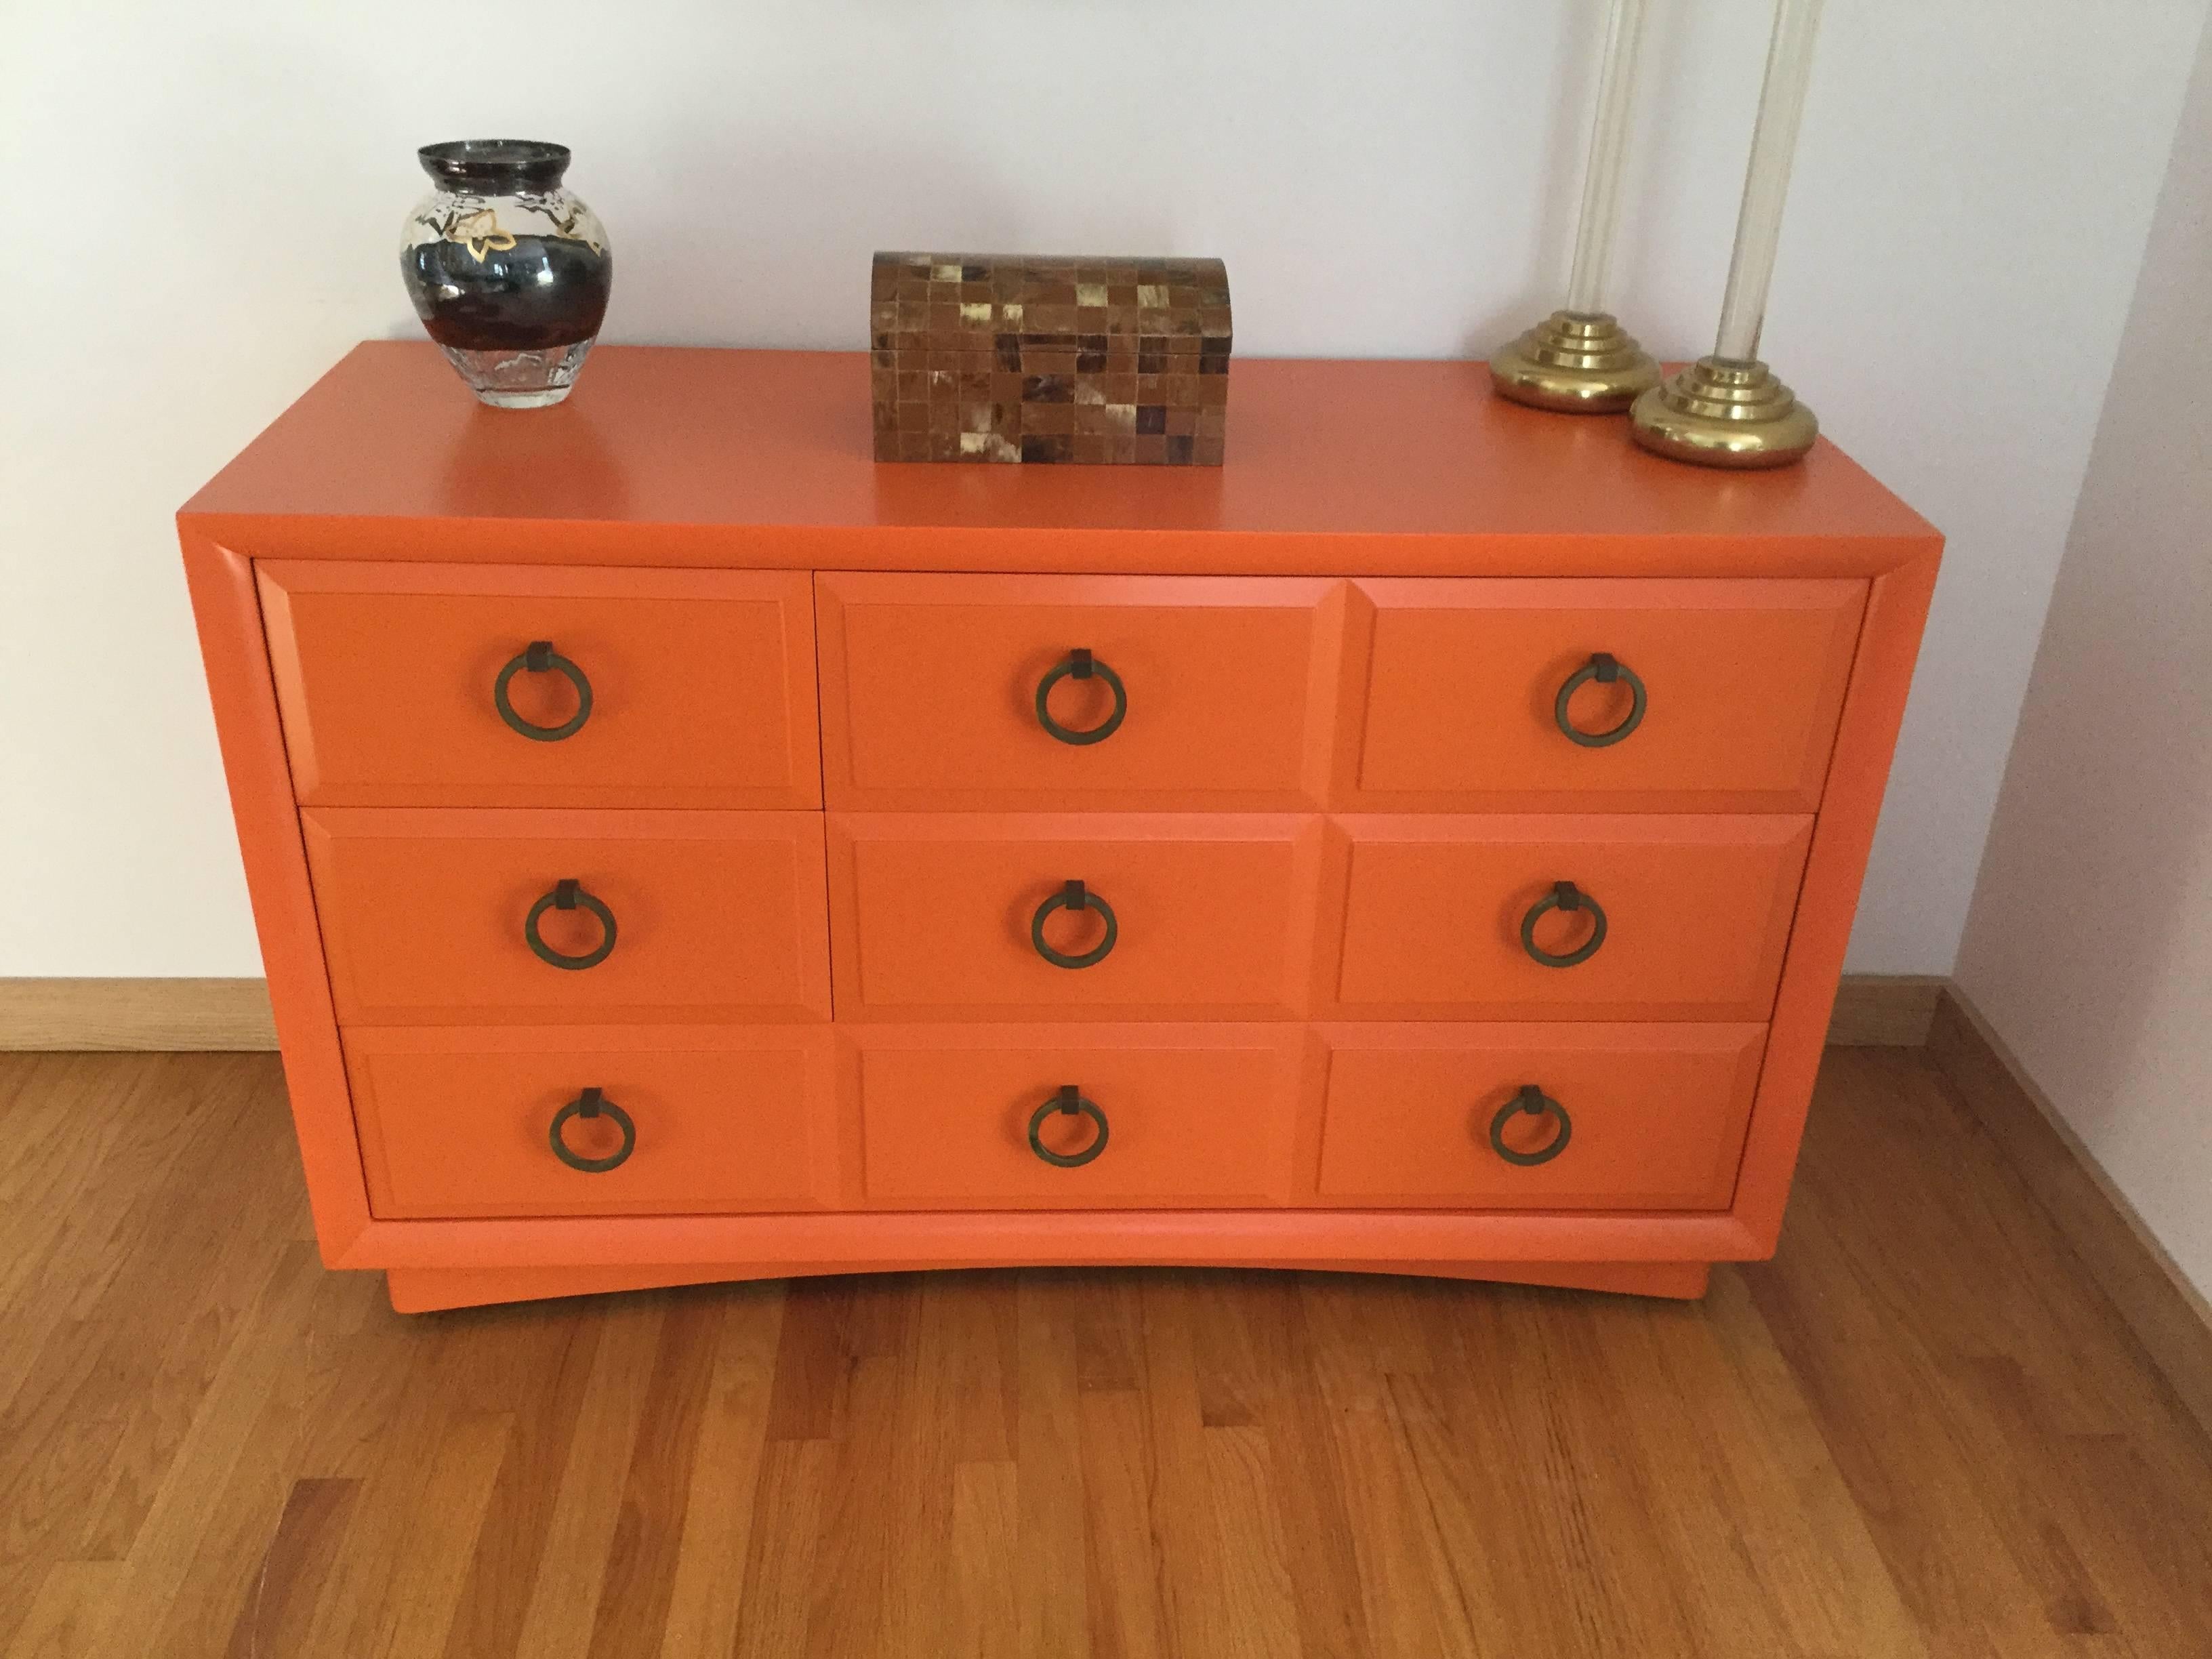 Fresh update in Hermes orange lacquer.
Nice generous size. Can be used in any room.